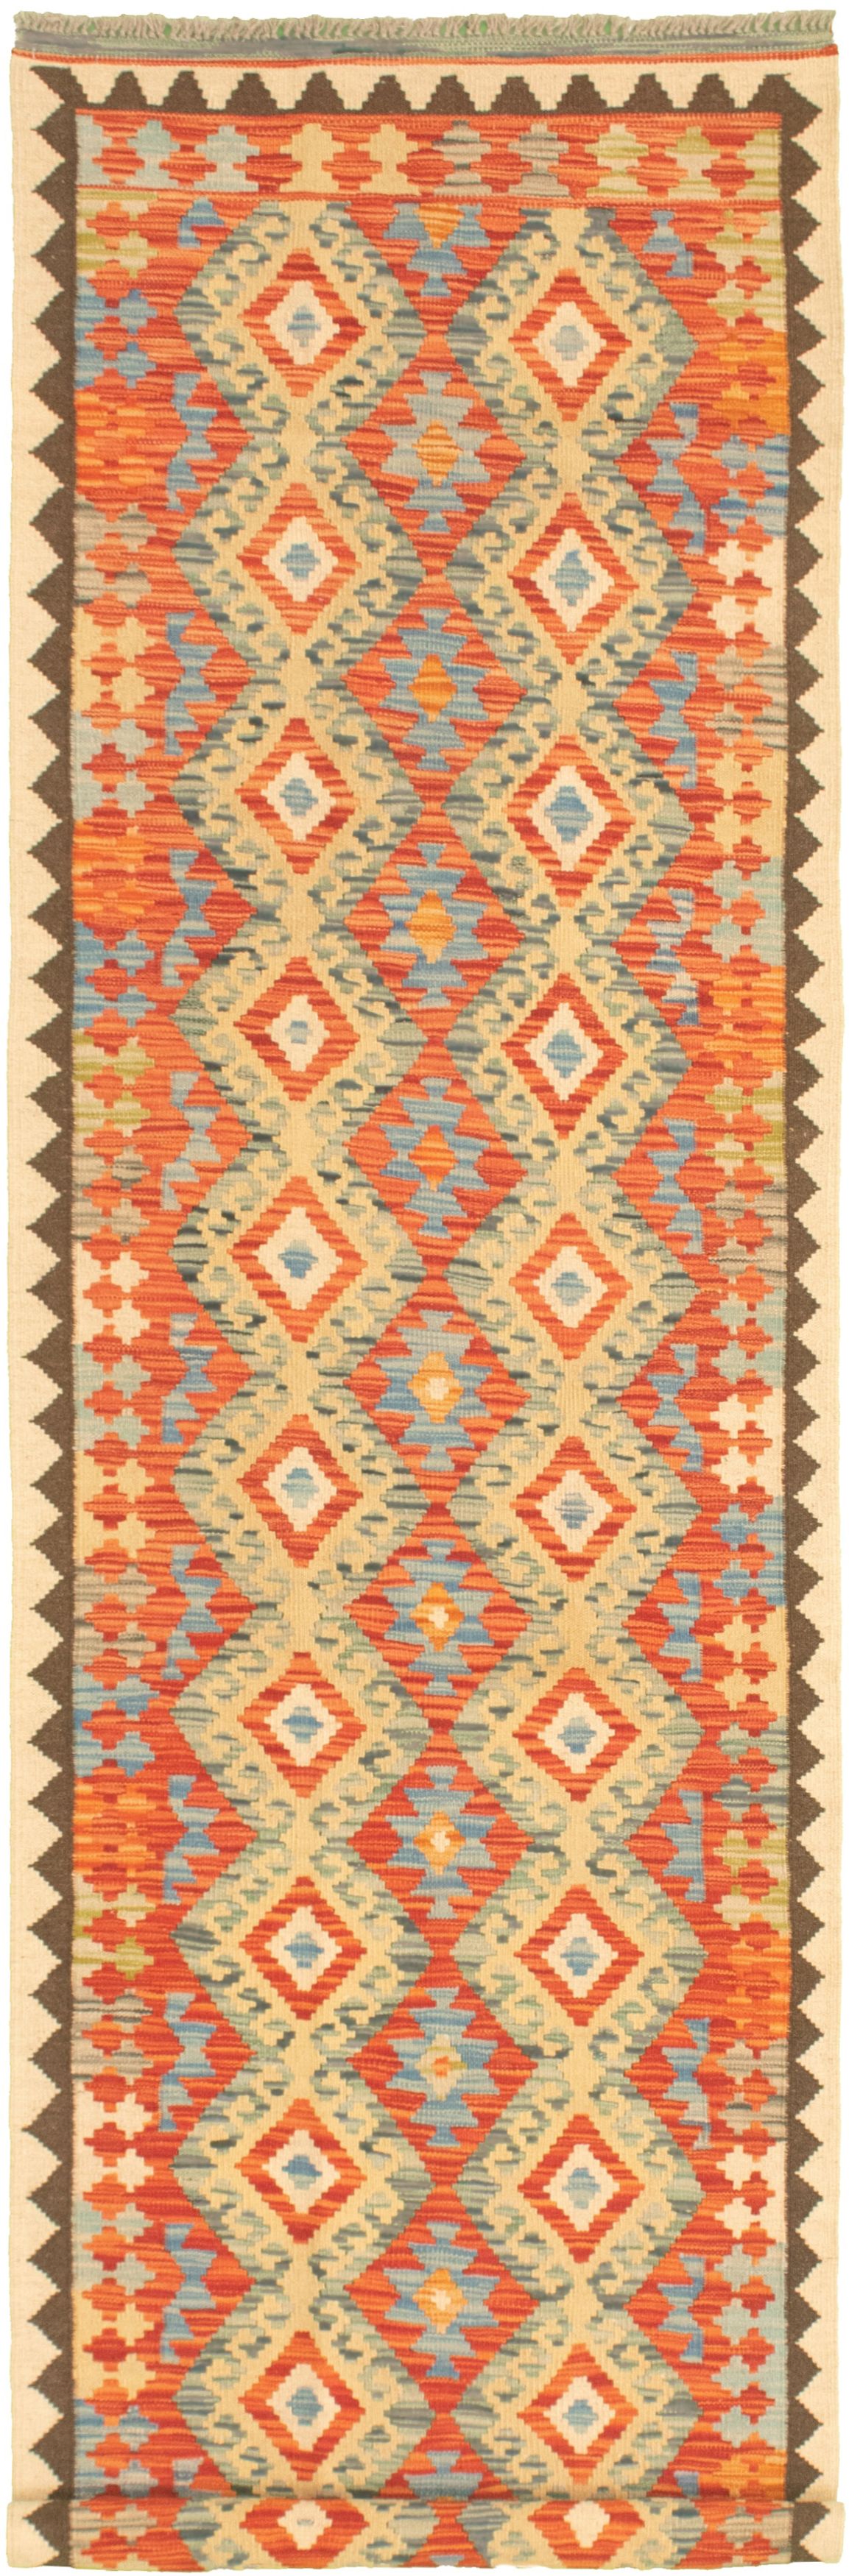 Hand woven Bold and Colorful  Dark Copper Wool Kilim 2'7" x 9'10" Size: 2'7" x 9'10"  